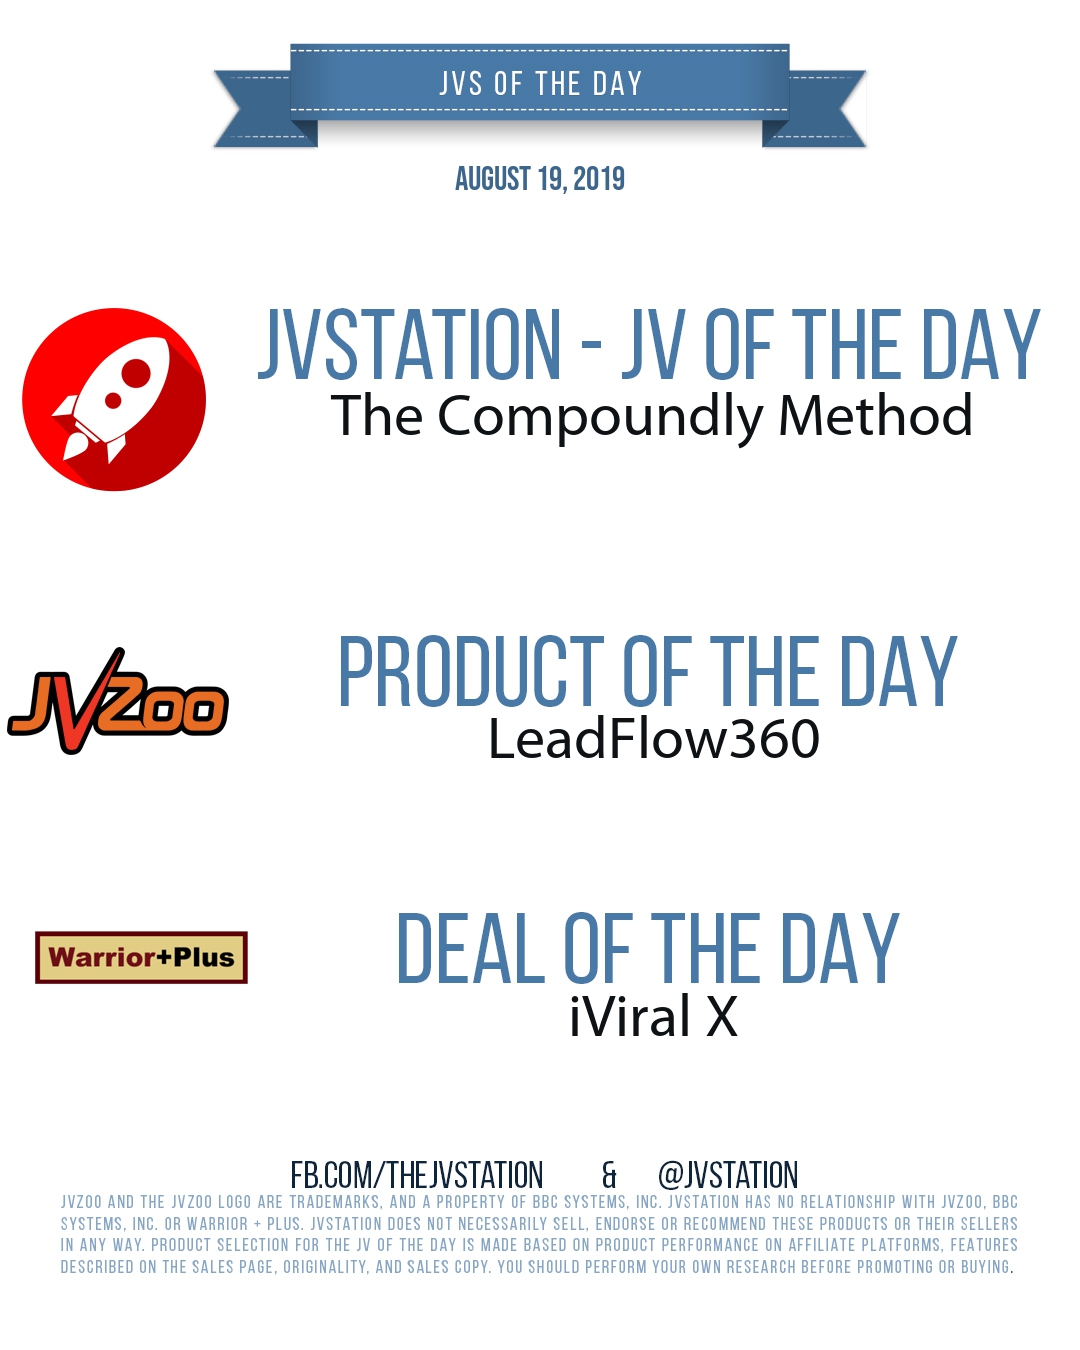 JVs of the day - August 20, 2019